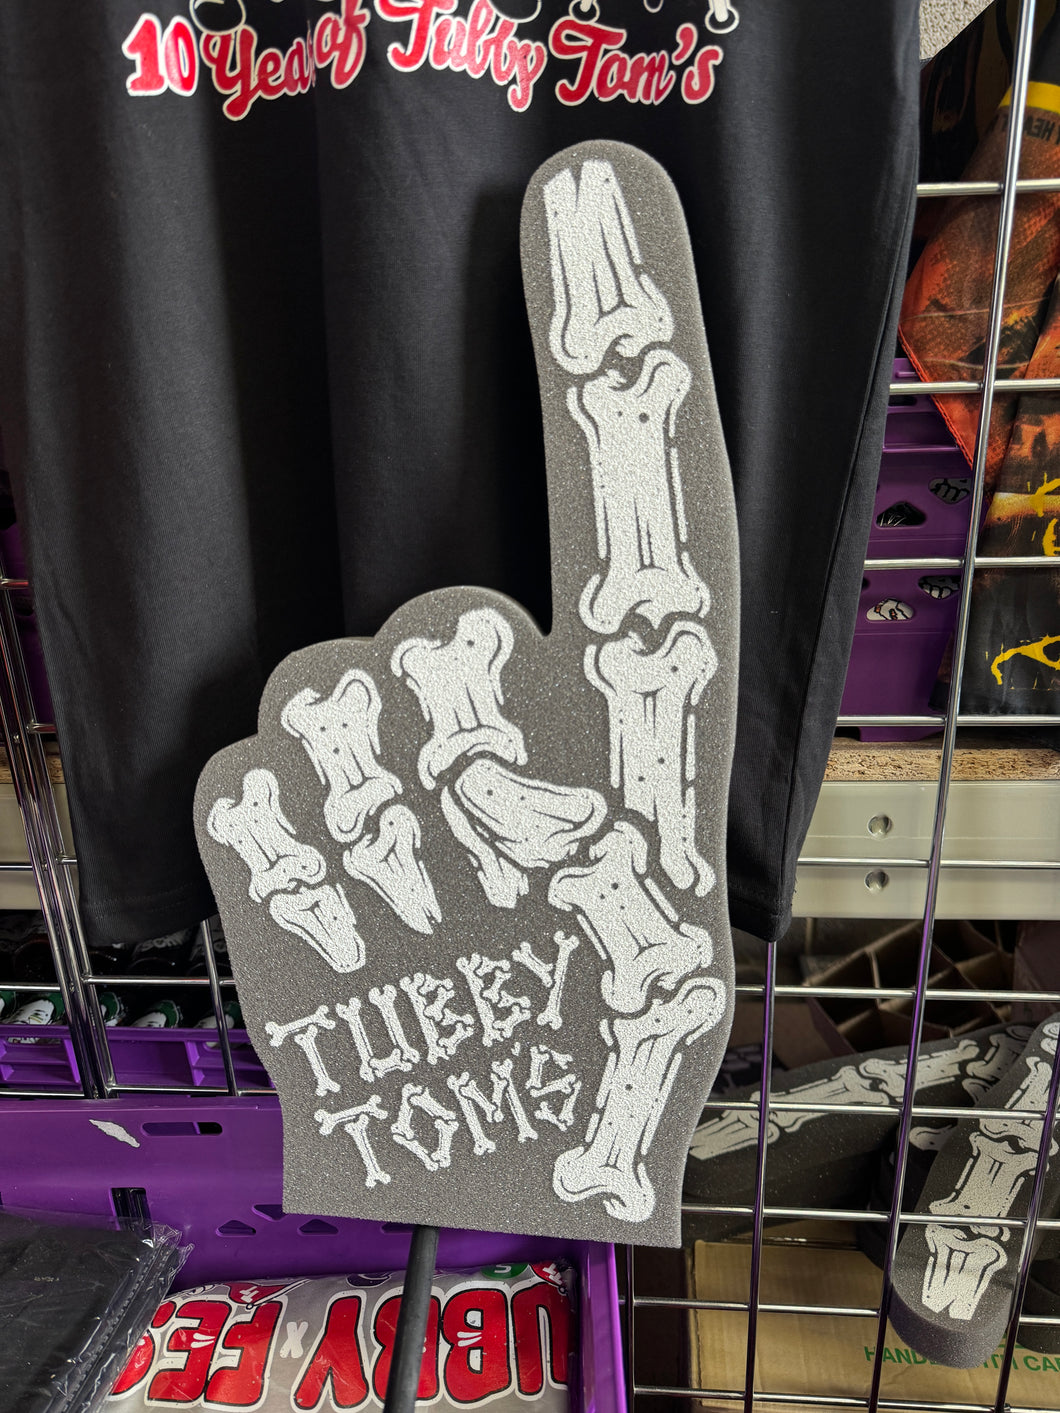 Tubby Tom's NUMBER ONE FOAM HAND